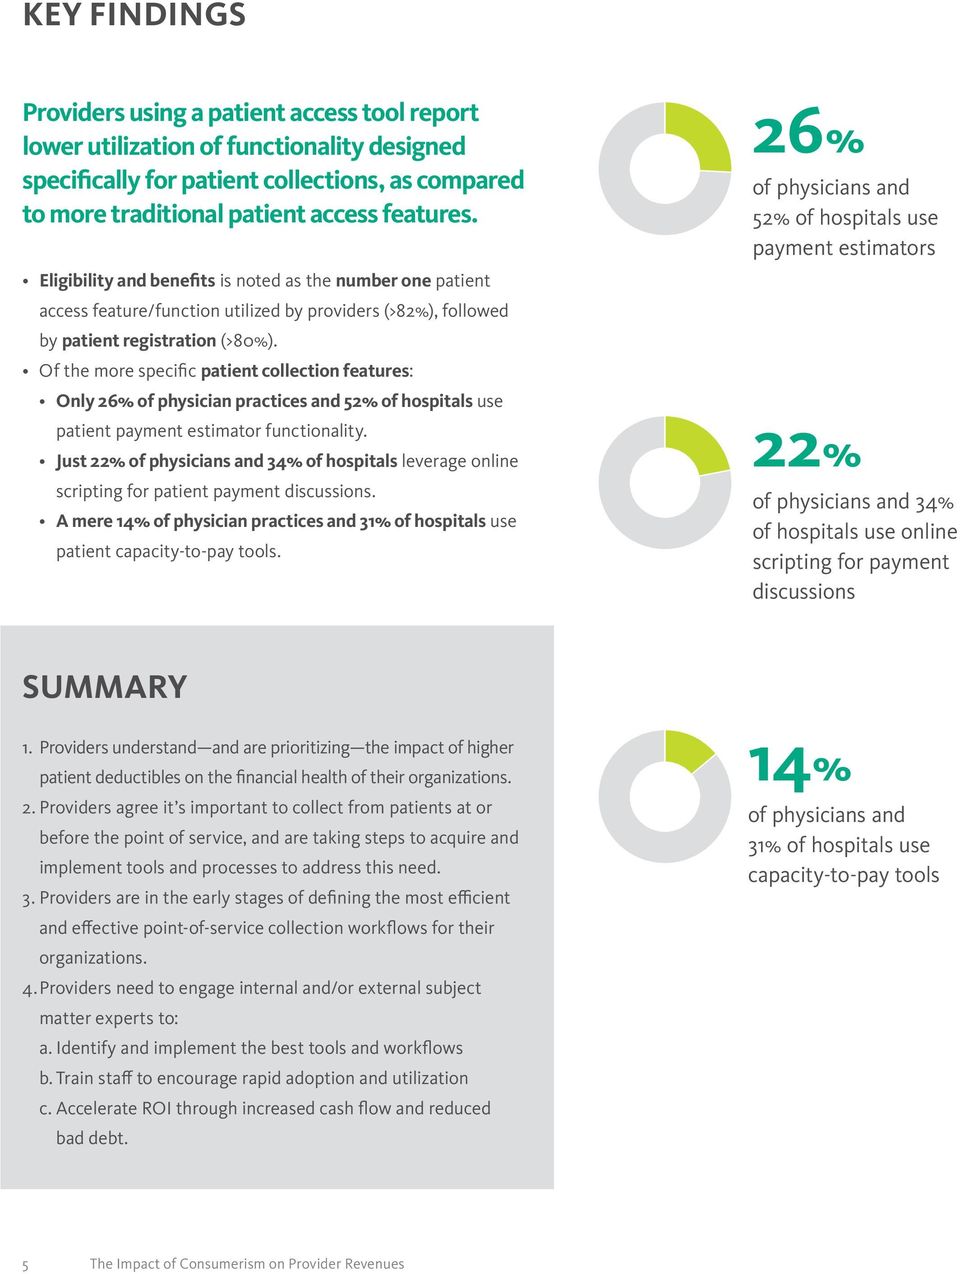 Of the more specific patient collection features: Only 26% of physician practices and 52% of hospitals use patient payment estimator functionality.